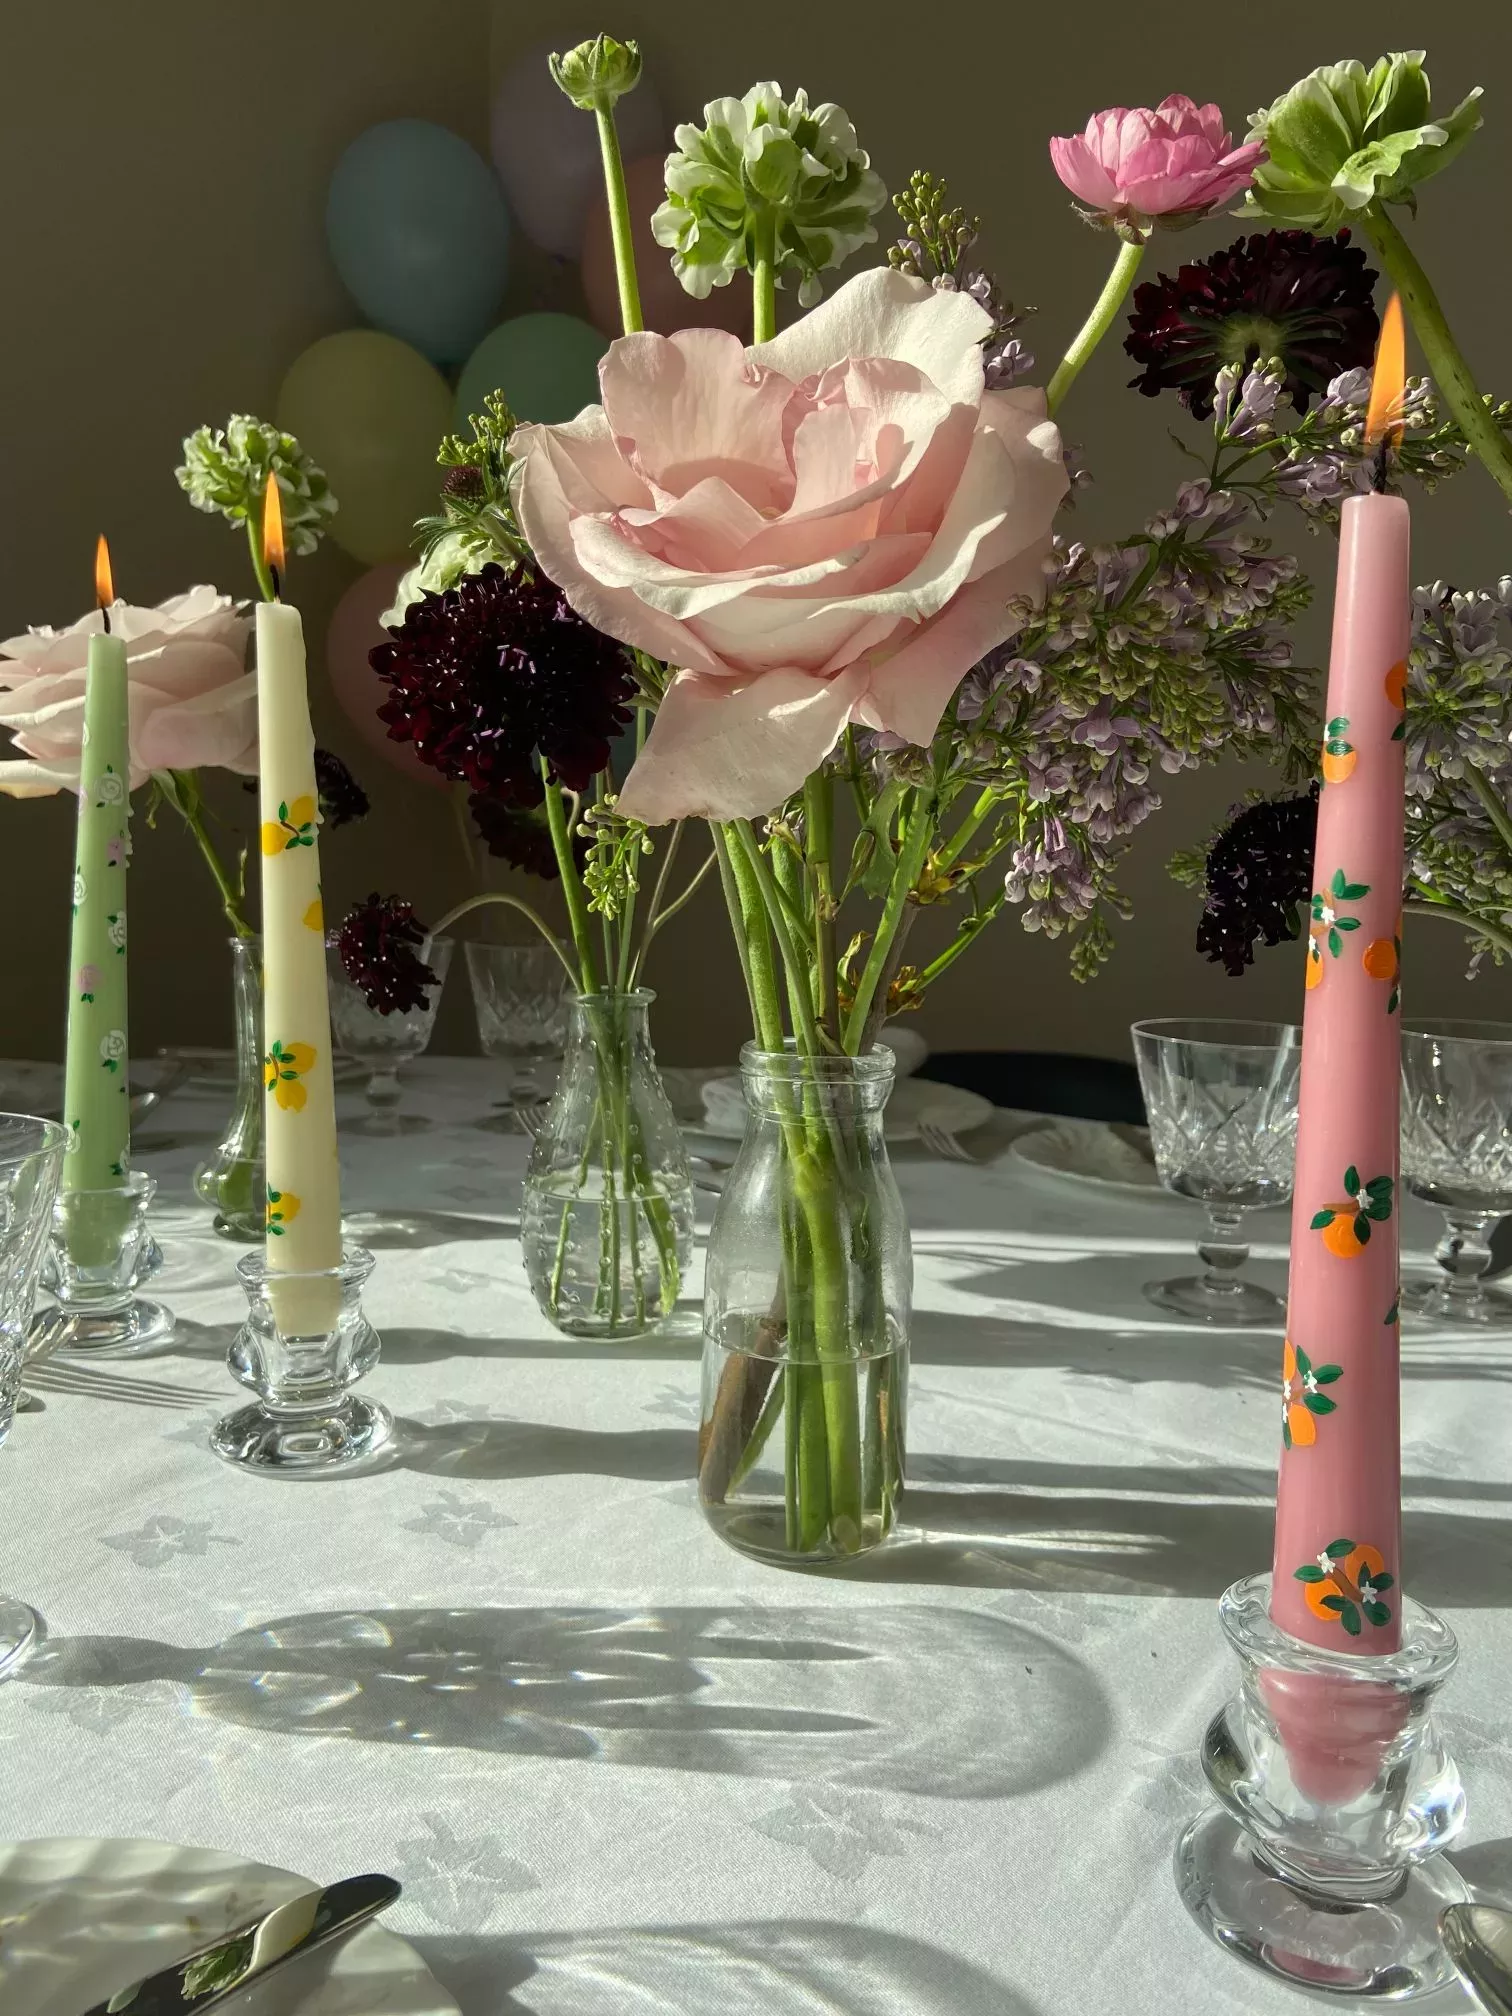 Painted botanical candles on a table with flowers